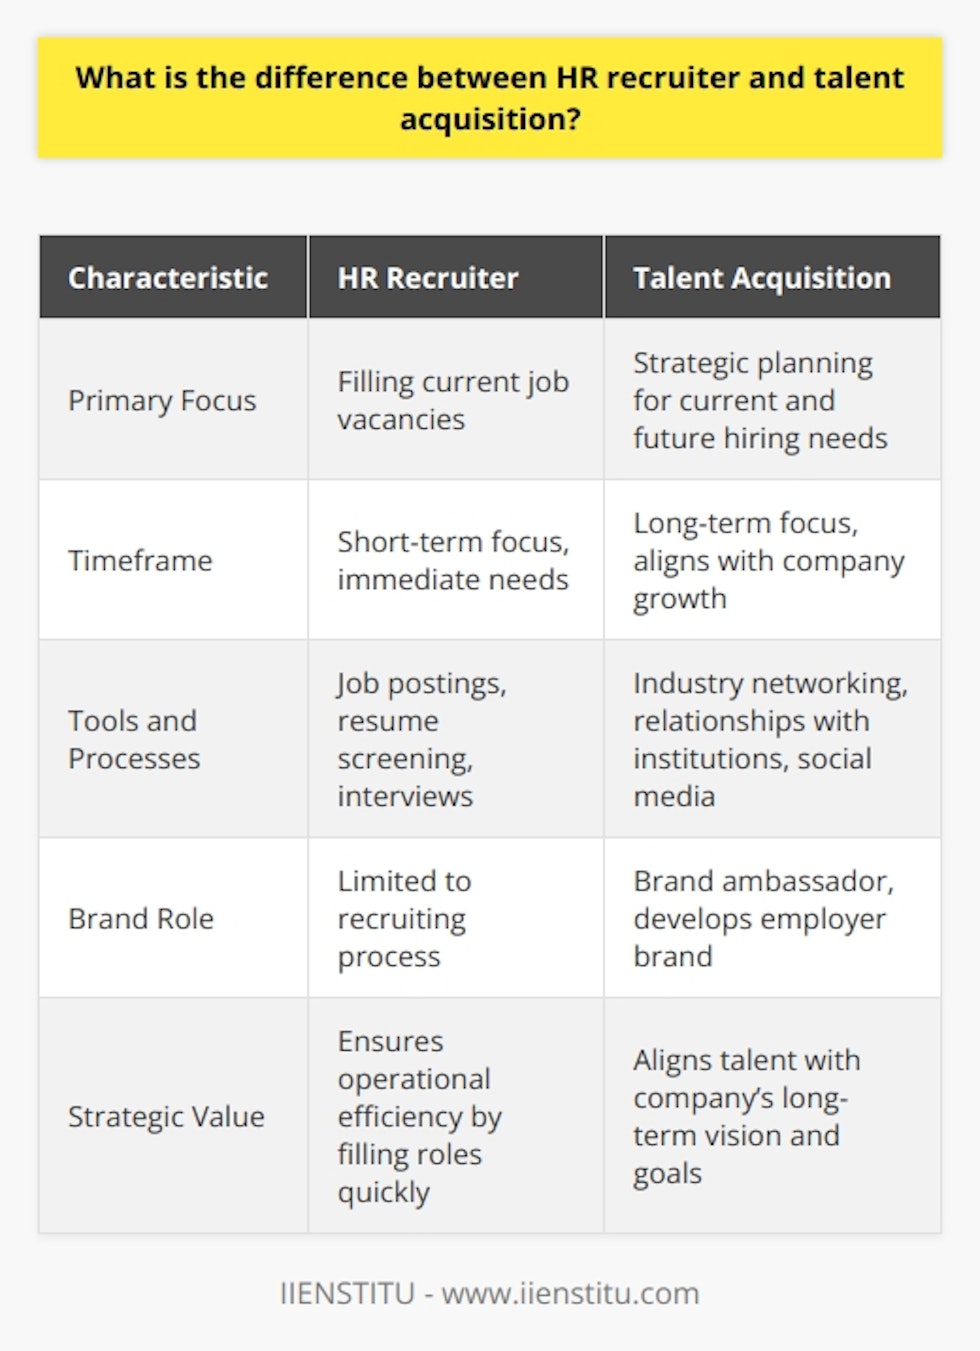 The roles of Human Resources (HR) recruiters and talent acquisition professionals may intersect in many companies, but fundamentally, these positions have differing focuses and involve unique processes in sourcing and hiring employees.An HR recruiter typically operates with the immediate task of filling current job vacancies. They work within a timeframe that aims to quickly resolve staffing shortages and maintain operational efficiency within an organization. They utilize a variety of tools and resources to attract candidates, including job postings on various platforms, screening processes involving resume review and interviews, and finally, the selection of candidates to fill open positions. An HR recruiter has a critical role in ensuring that the day-to-day human resource needs of the company are met efficiently.On the other hand, talent acquisition is a broader and more strategic function that involves not just recruiting but also planning and analysis to align a company's long-term goals with its hiring practices. Talent acquisition specialists focus on identifying and securing individuals not just for current but also for future potential roles, often in alignment with the company’s growth strategies and evolving market conditions. They build a pipeline of talent that can be tapped into as and when needed, rather than just looking for immediate placements.In addition to filling positions, talent acquisition professionals often take on roles akin to brand ambassadors; they champion the company's culture and brand in the market to attract top talent. They engage in activities such as attending industry networking events, building relationships with educational institutions, and leveraging social media to engage potential candidates. They strategically develop an employer brand that resonates with the company's mission and appeal to the type of employee that aligns with the organization’s long-term vision.Integration of employer branding is a key differentiator in talent acquisition. This aspect helps prospective candidates understand the benefits and opportunities that come with working for an organization, and can also assist with retention by aligning the expectations of new hires with the lived reality of the company's working environment.In essence, while the HR recruiter's role is crucial for the company's immediate functional needs by filling positions quickly and efficiently, the talent acquisition professional operates on a broader spectrum. They invest in understanding the market, anticipating future skills requirements, and developing a compelling employer brand to attract and engage the talent that will help the company succeed in the long term. Both roles play vital and complementary roles within a company's HR department, and together they form the backbone of an organization's overall strategic approach to acquiring and managing top-performing employees.